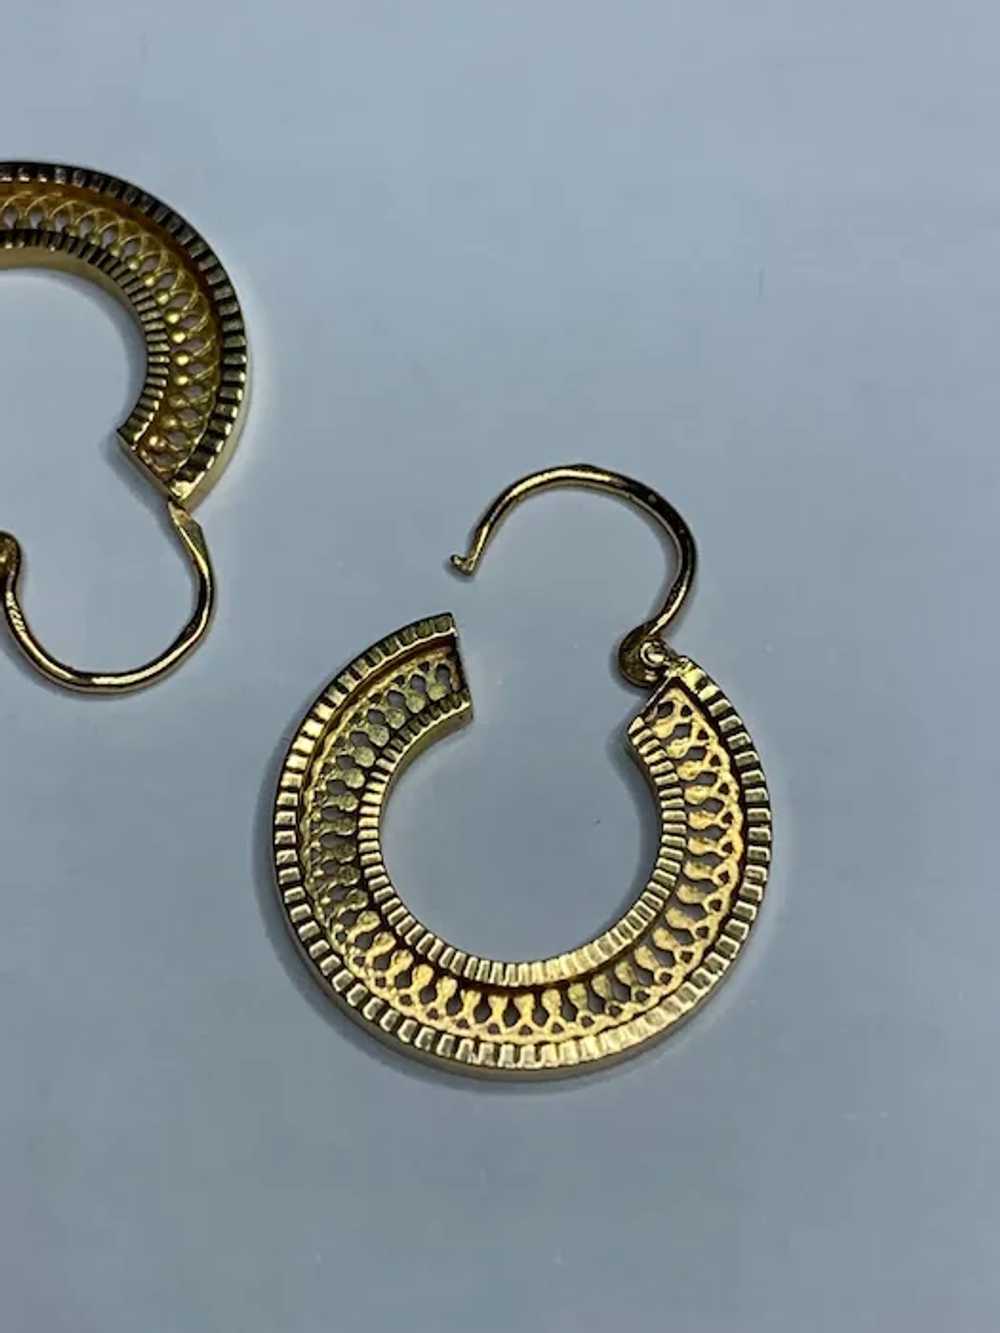 French 18 K gold Creole Earrings - image 2